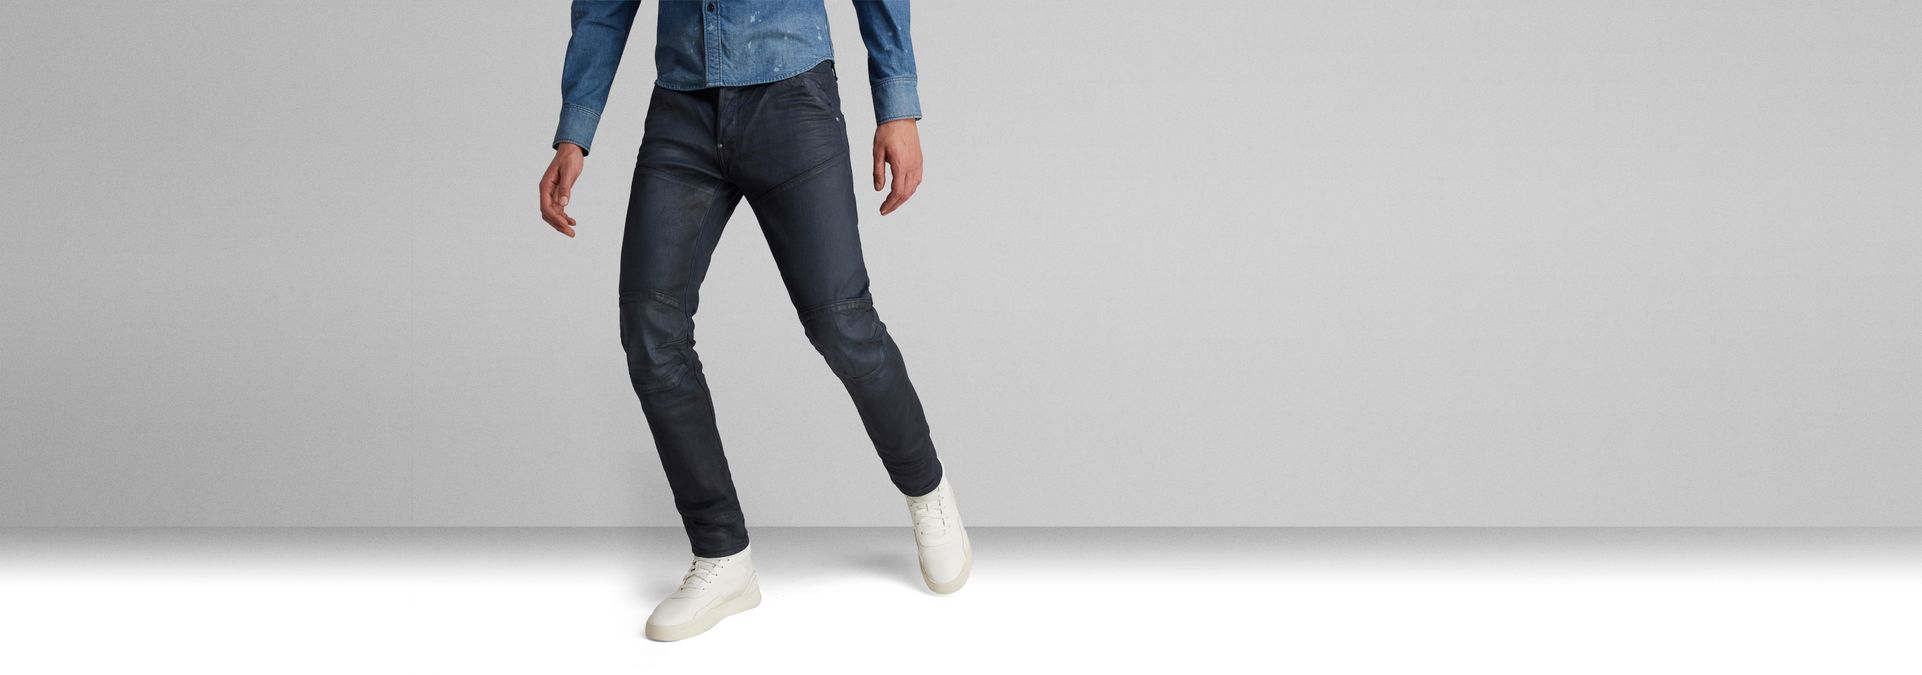 G-STAR RAW 5620 3D Slim Colored Jeans Uomo 